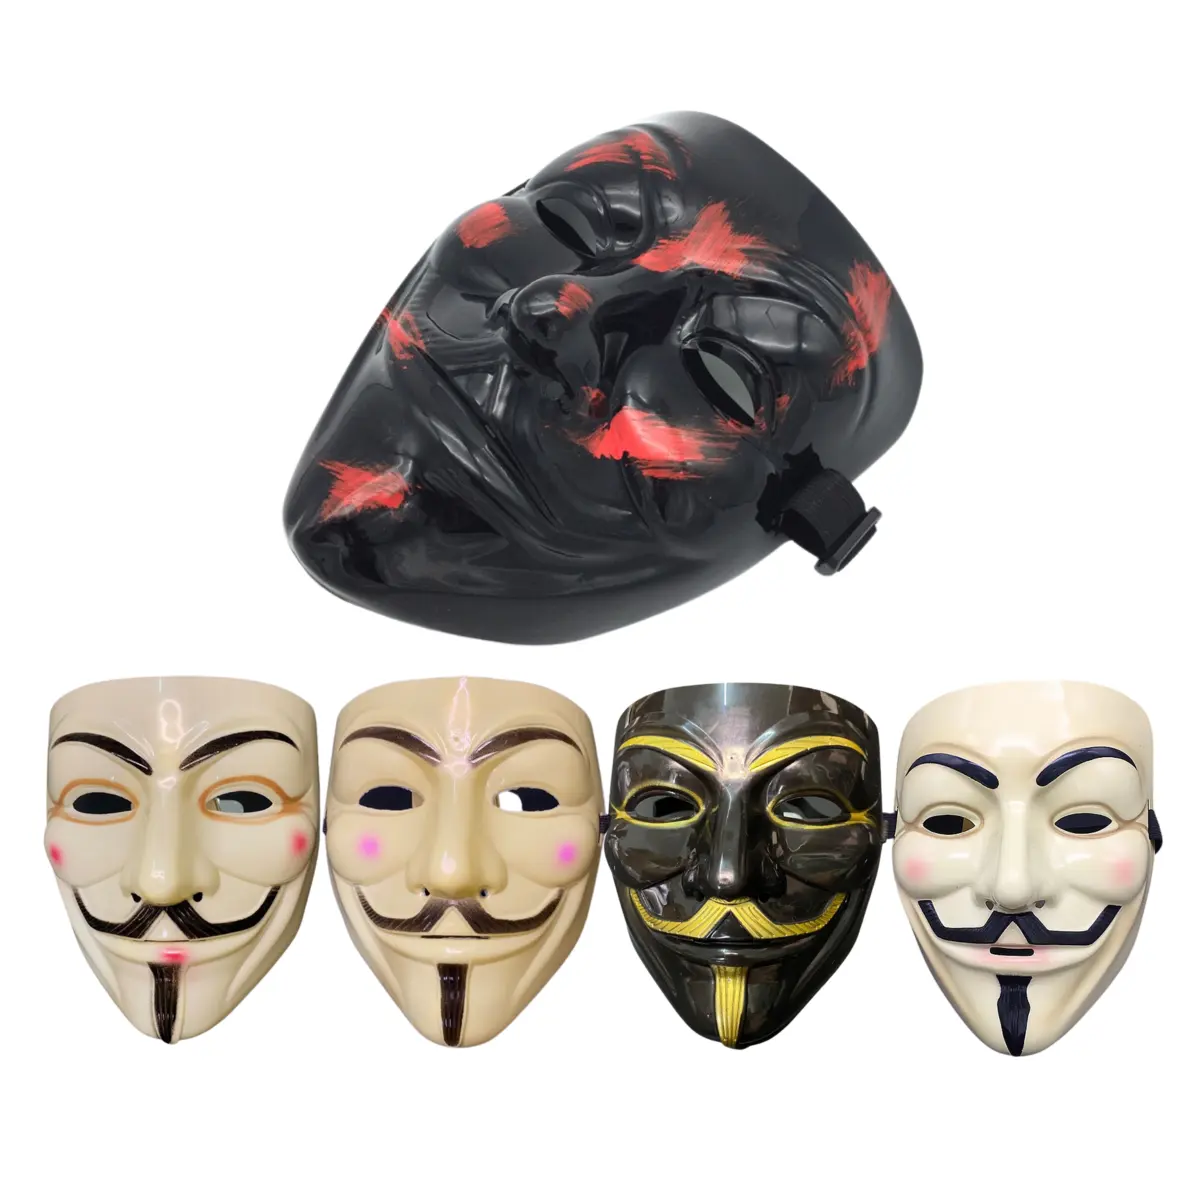 Halloween colored V for Vendetta Guy Fawkes Face Mask for Carnival Costume Party Props Mask